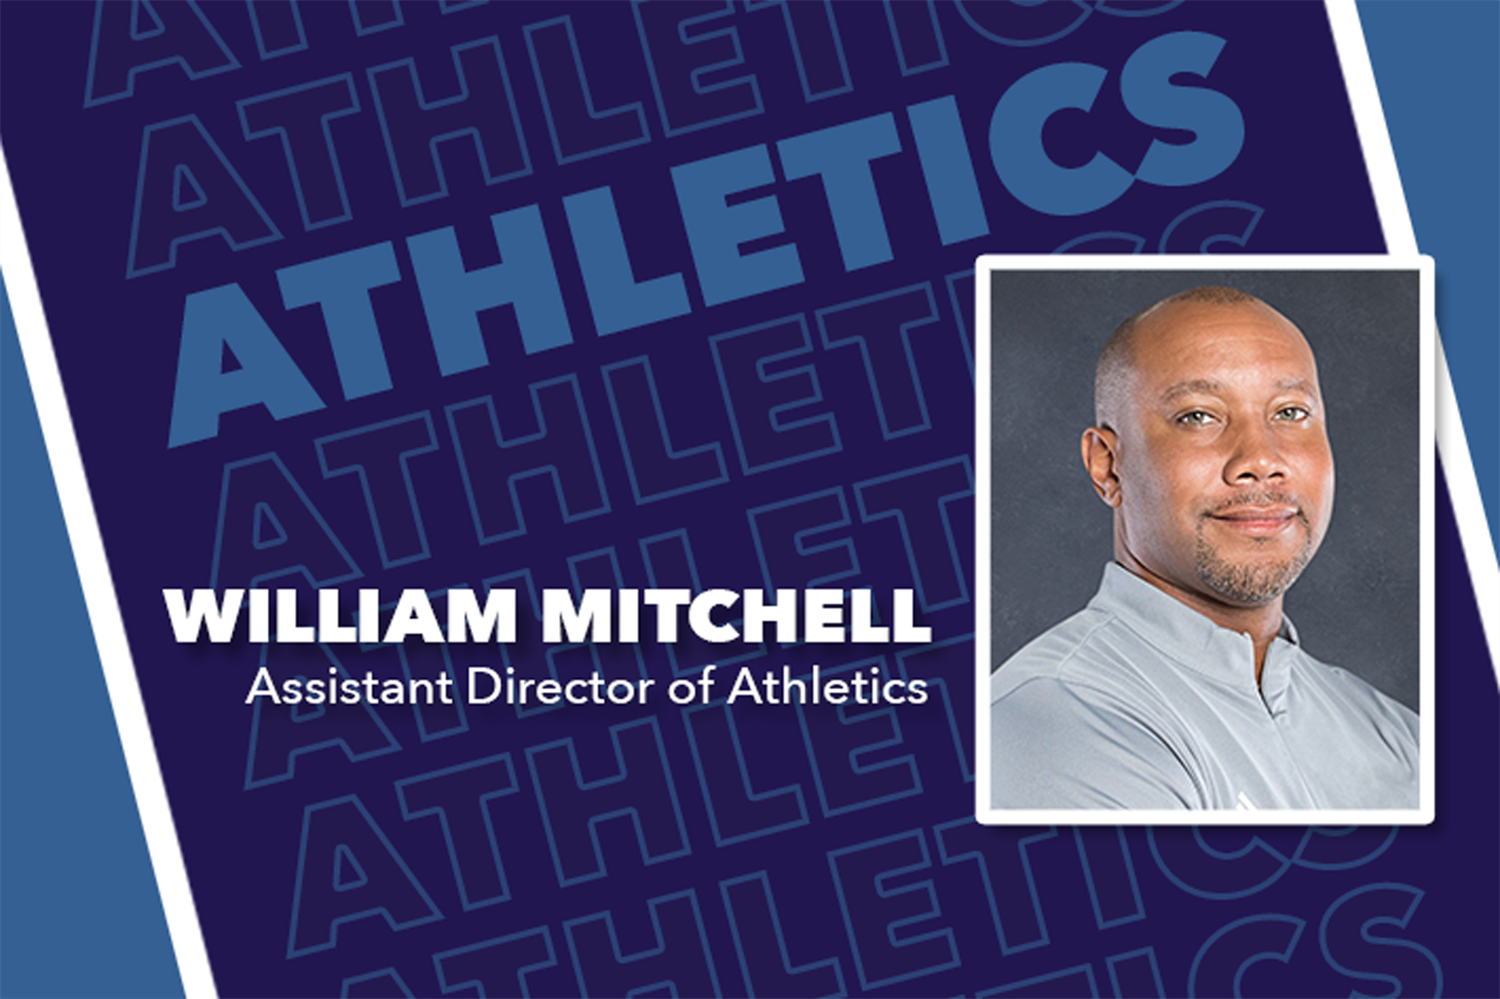  William Mitchell named an assistant athletic director for Dallas ISD